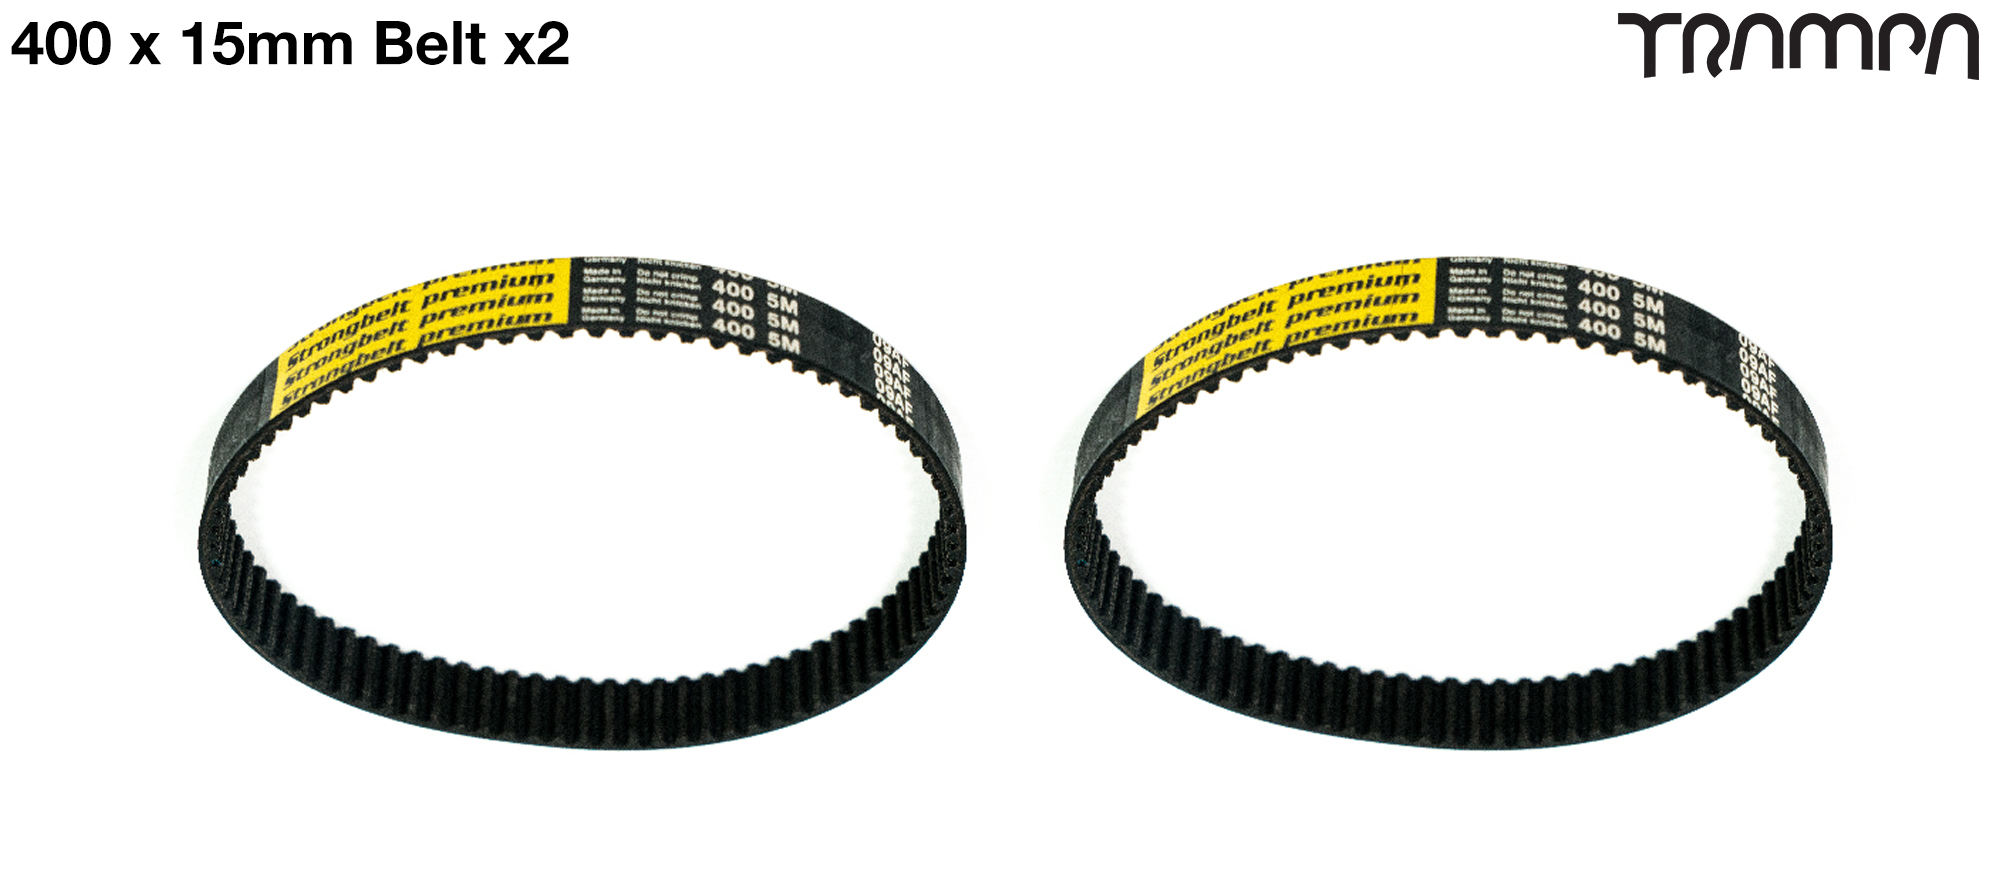 400 x 15mm STRONGBELT x2 - Special Offer